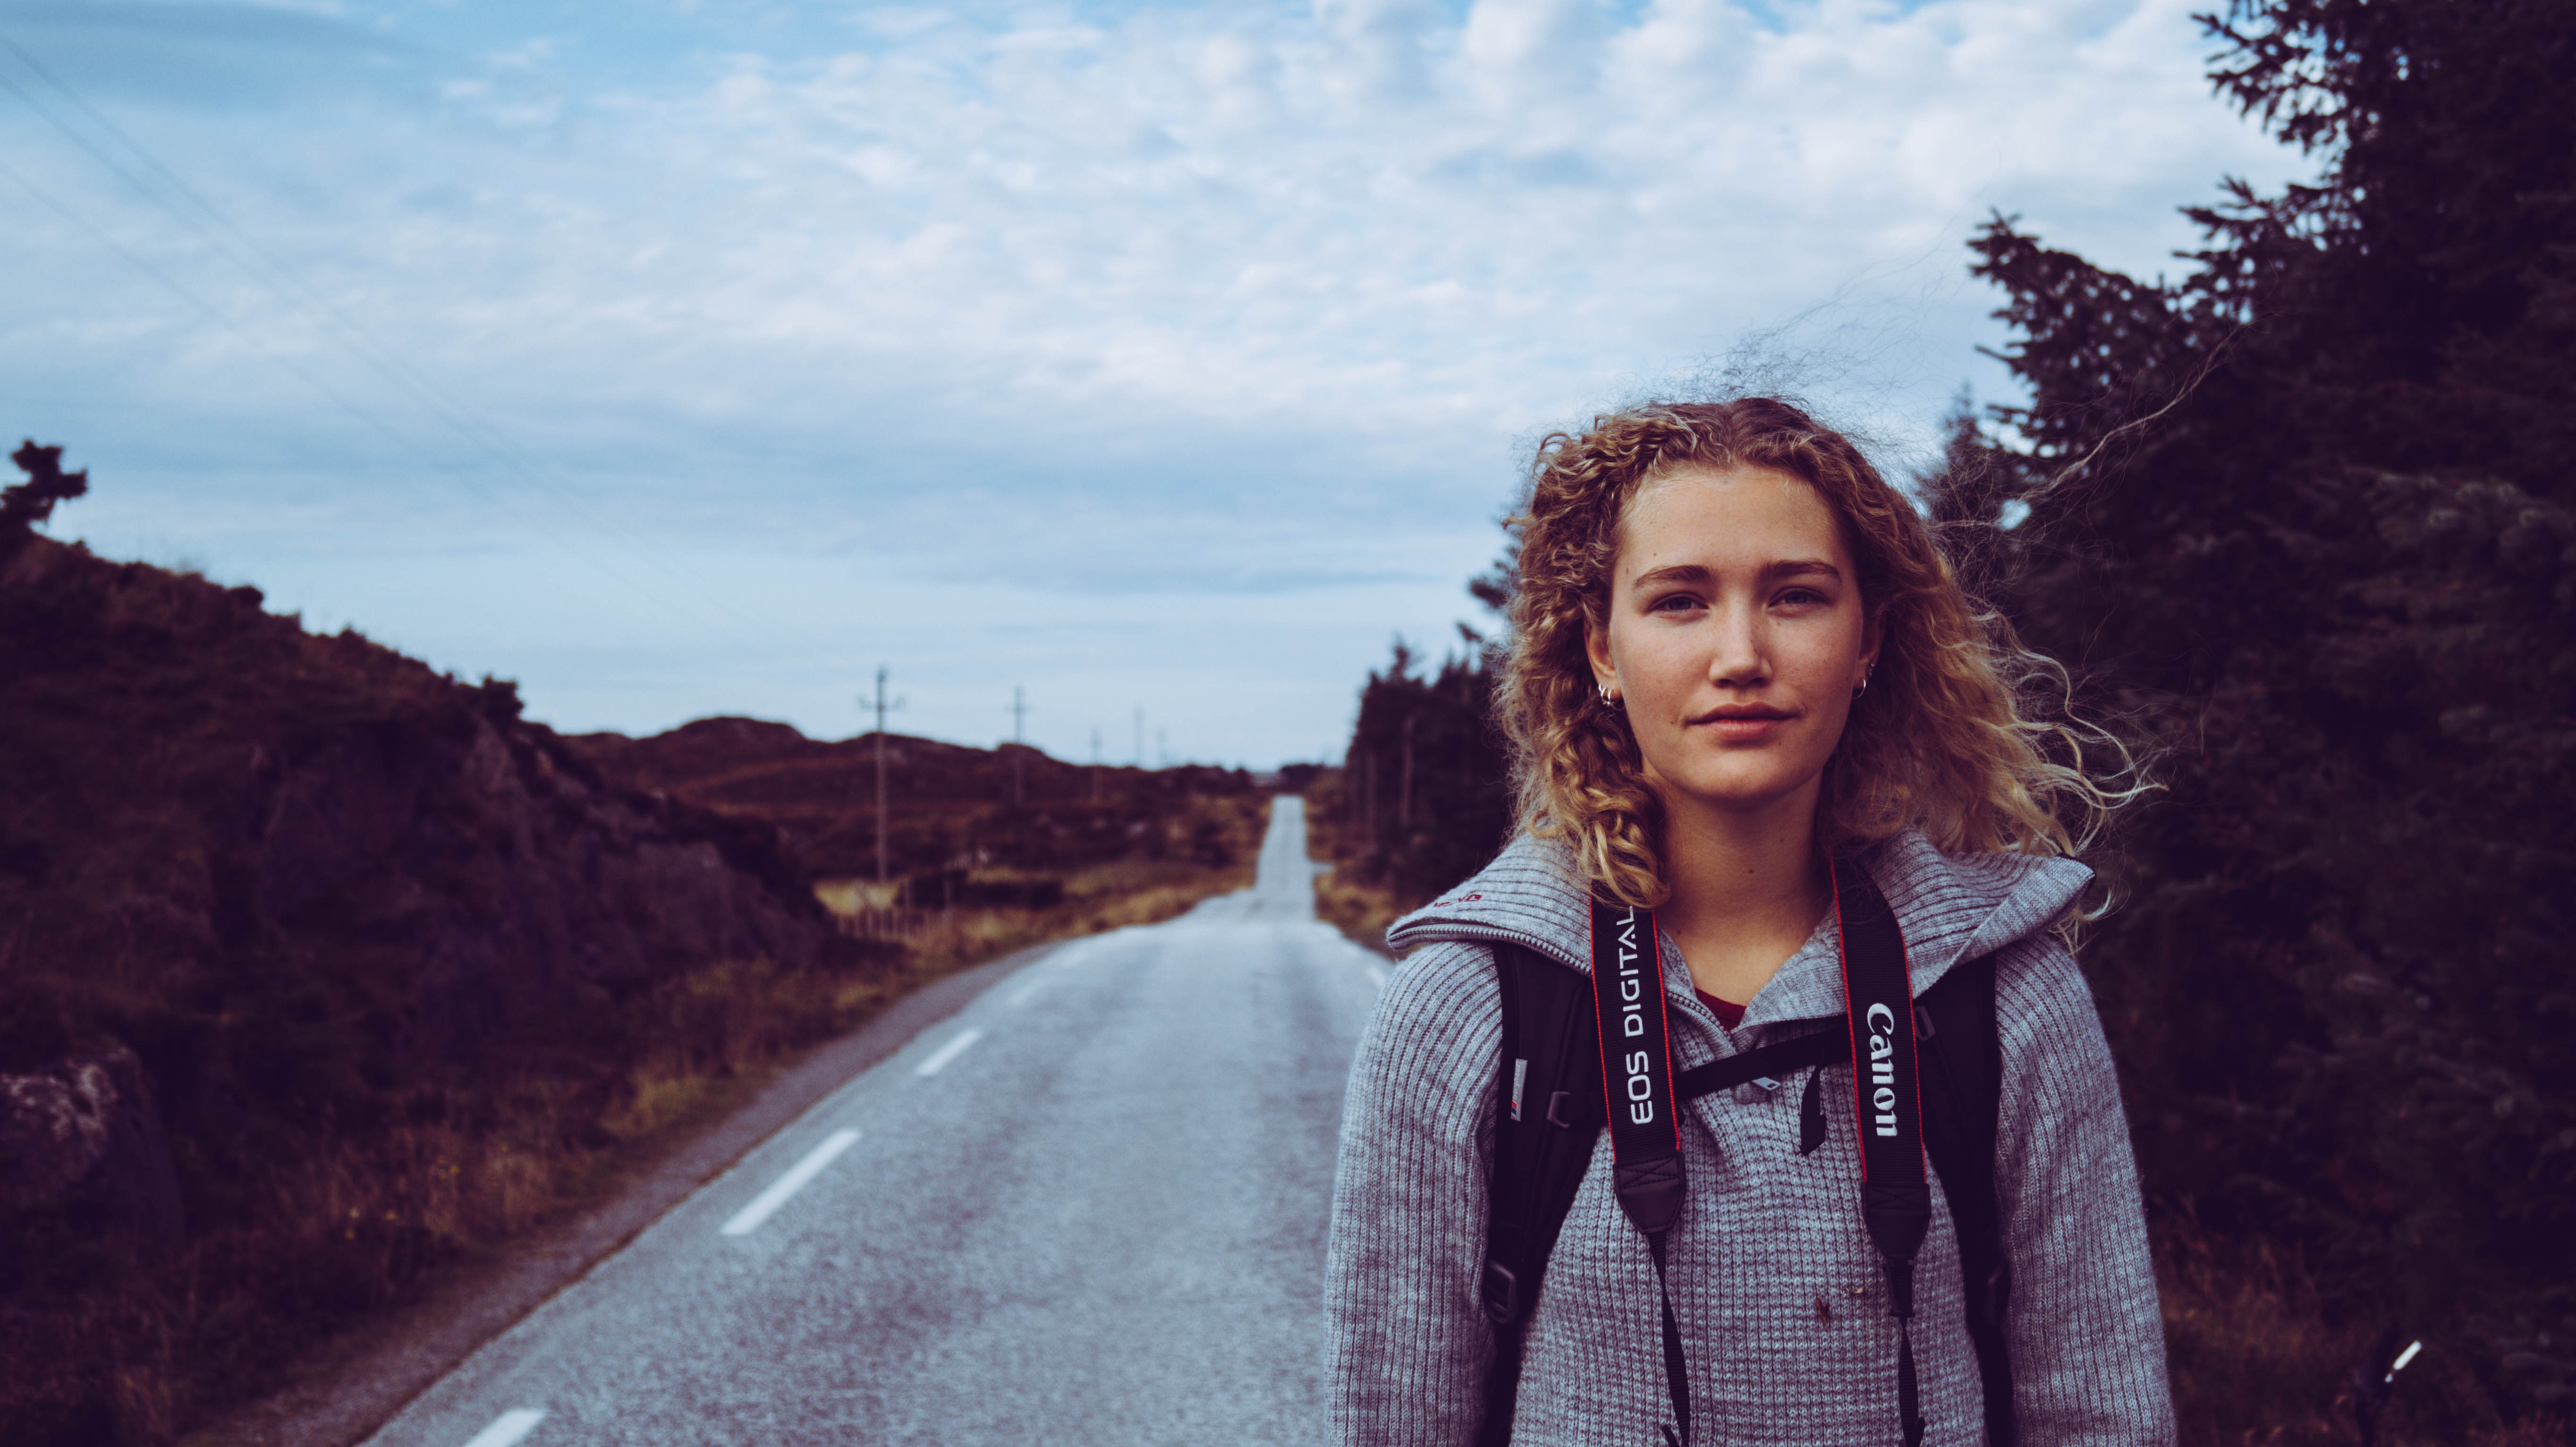 Norwegian Blonde Curly Hair Road Norway Women Outdoors Landscape Canon 5456x3064